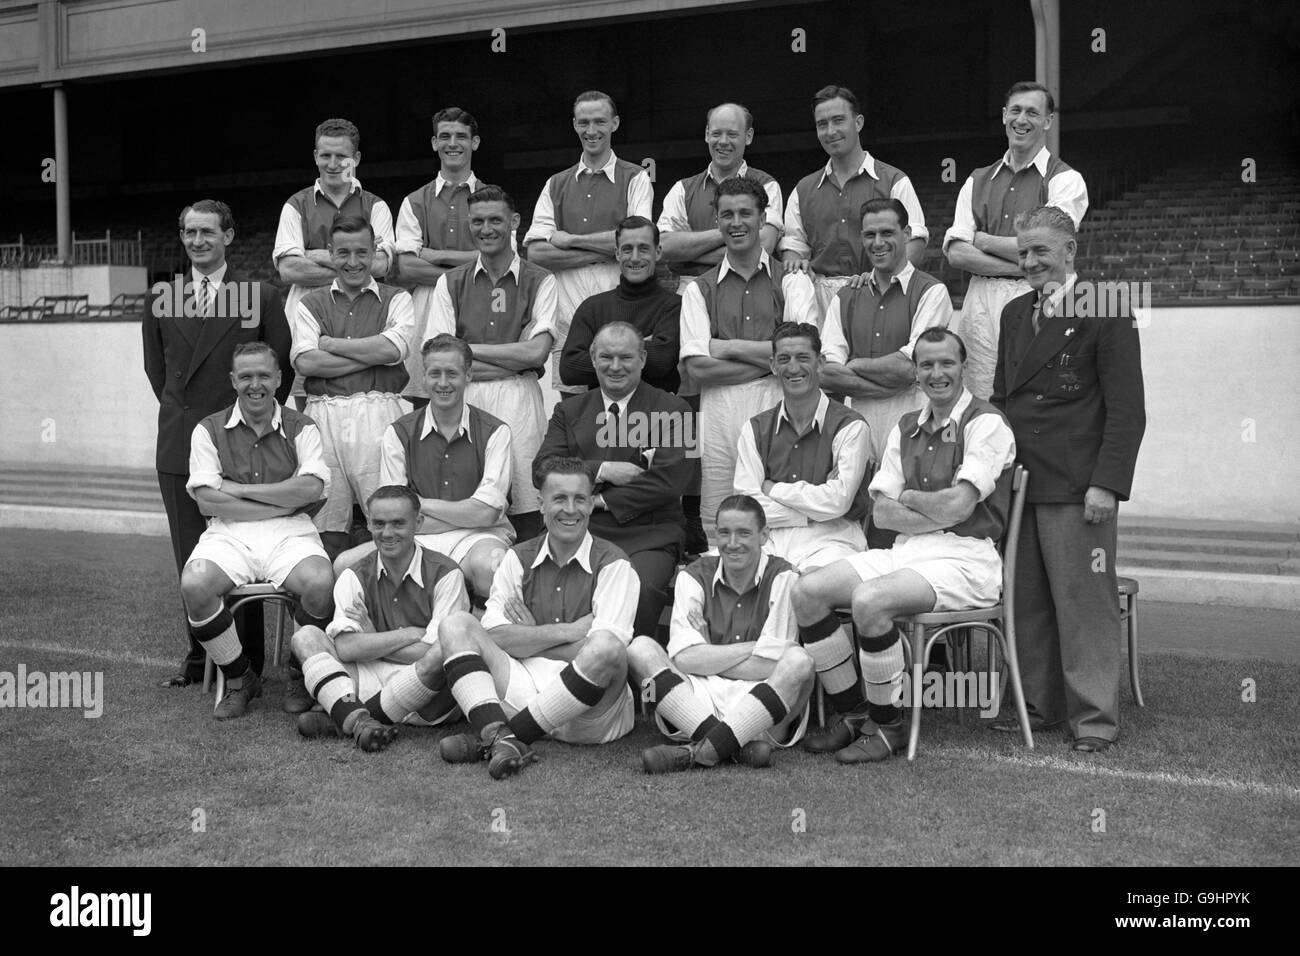 Arsenal team group: (back row, l-r) Alex Forbes, Joe Wade, Les Smith, George Male, Denis Compton, Joe Mercer; (middle row, l-r) Jack Crayston, Reg Lewis, Alf Fields, George Swindin, Les Compton, Ian McPherson, trainer Billy Milne; (front row, l-r) Laurie Scott, Archie MacAulay, manager Tom Whittaker, Ronnie Rooke, Wally Barnes; (on floor, l-r) Bryn Jones, Don Roper, Jimmy Logie Stock Photo